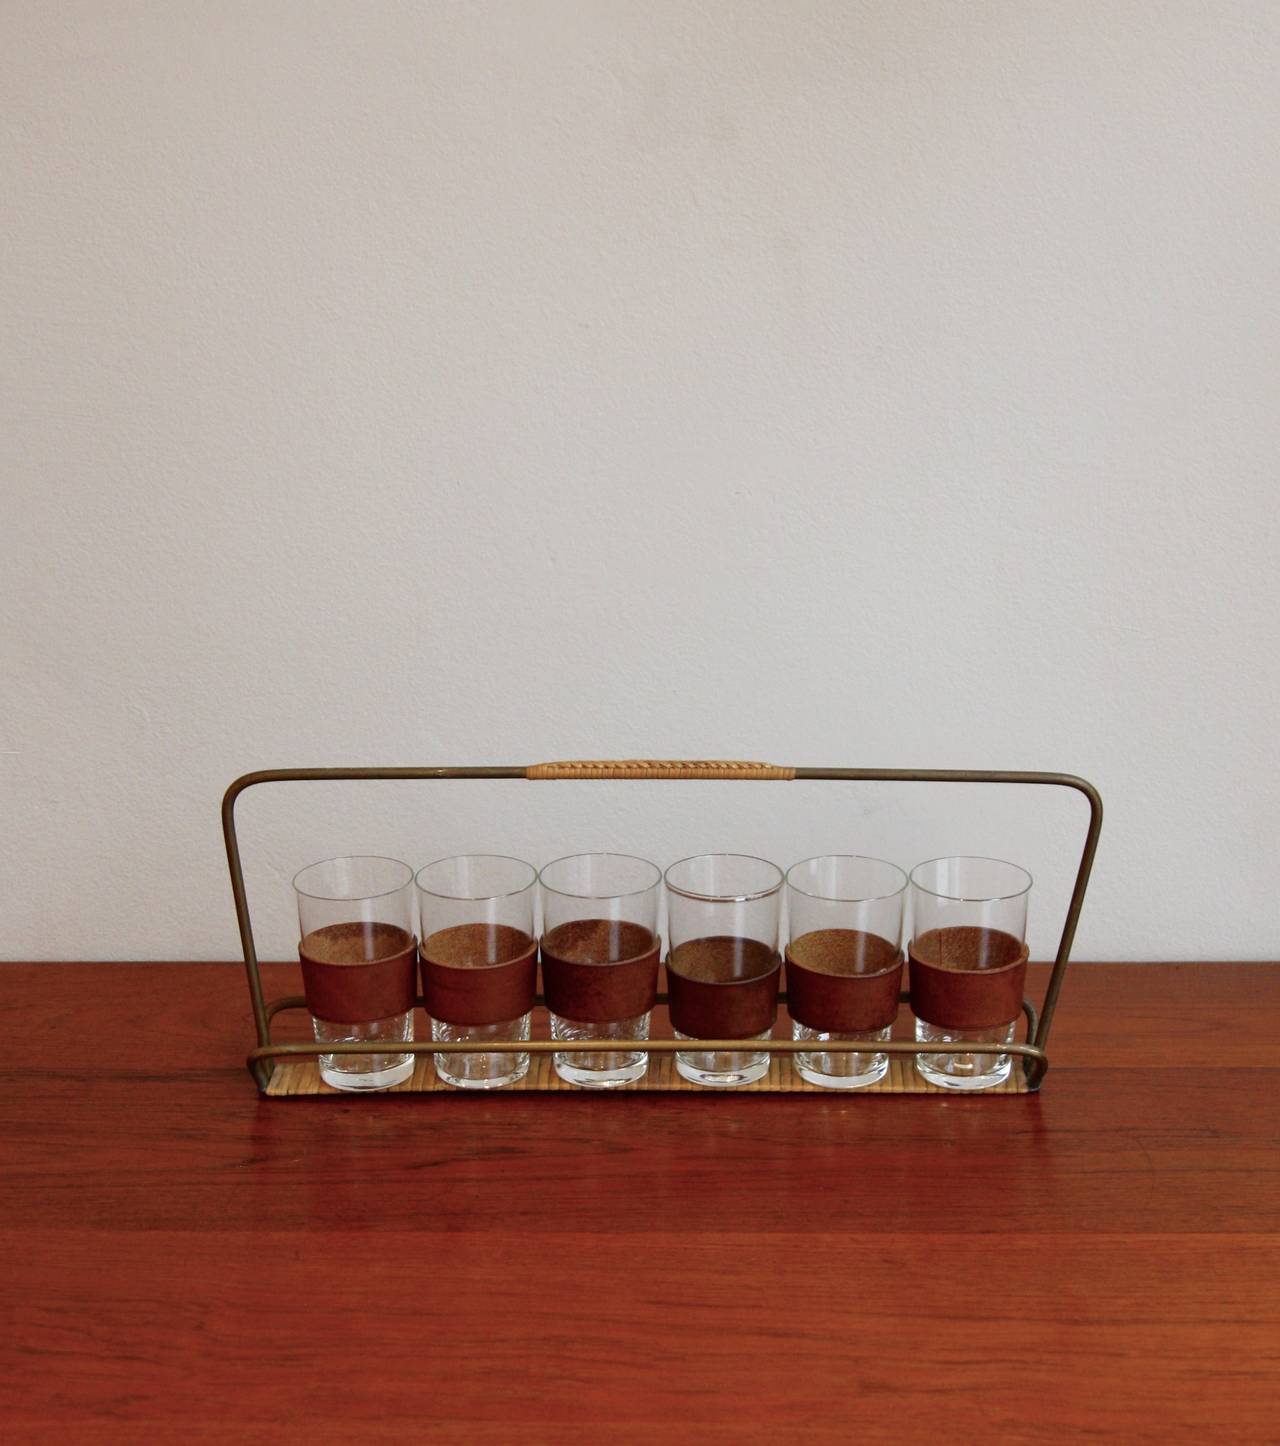 Set of six small glasses with cognac leather cover and brass and wicker drinks carrier handmade in the workshop of Carl Auböck's in the 1950s. Glasses are 10 cm in height and 5.5 in diameter while the carrier is 39.5 cm long, 14 cm tall and 6 deep.